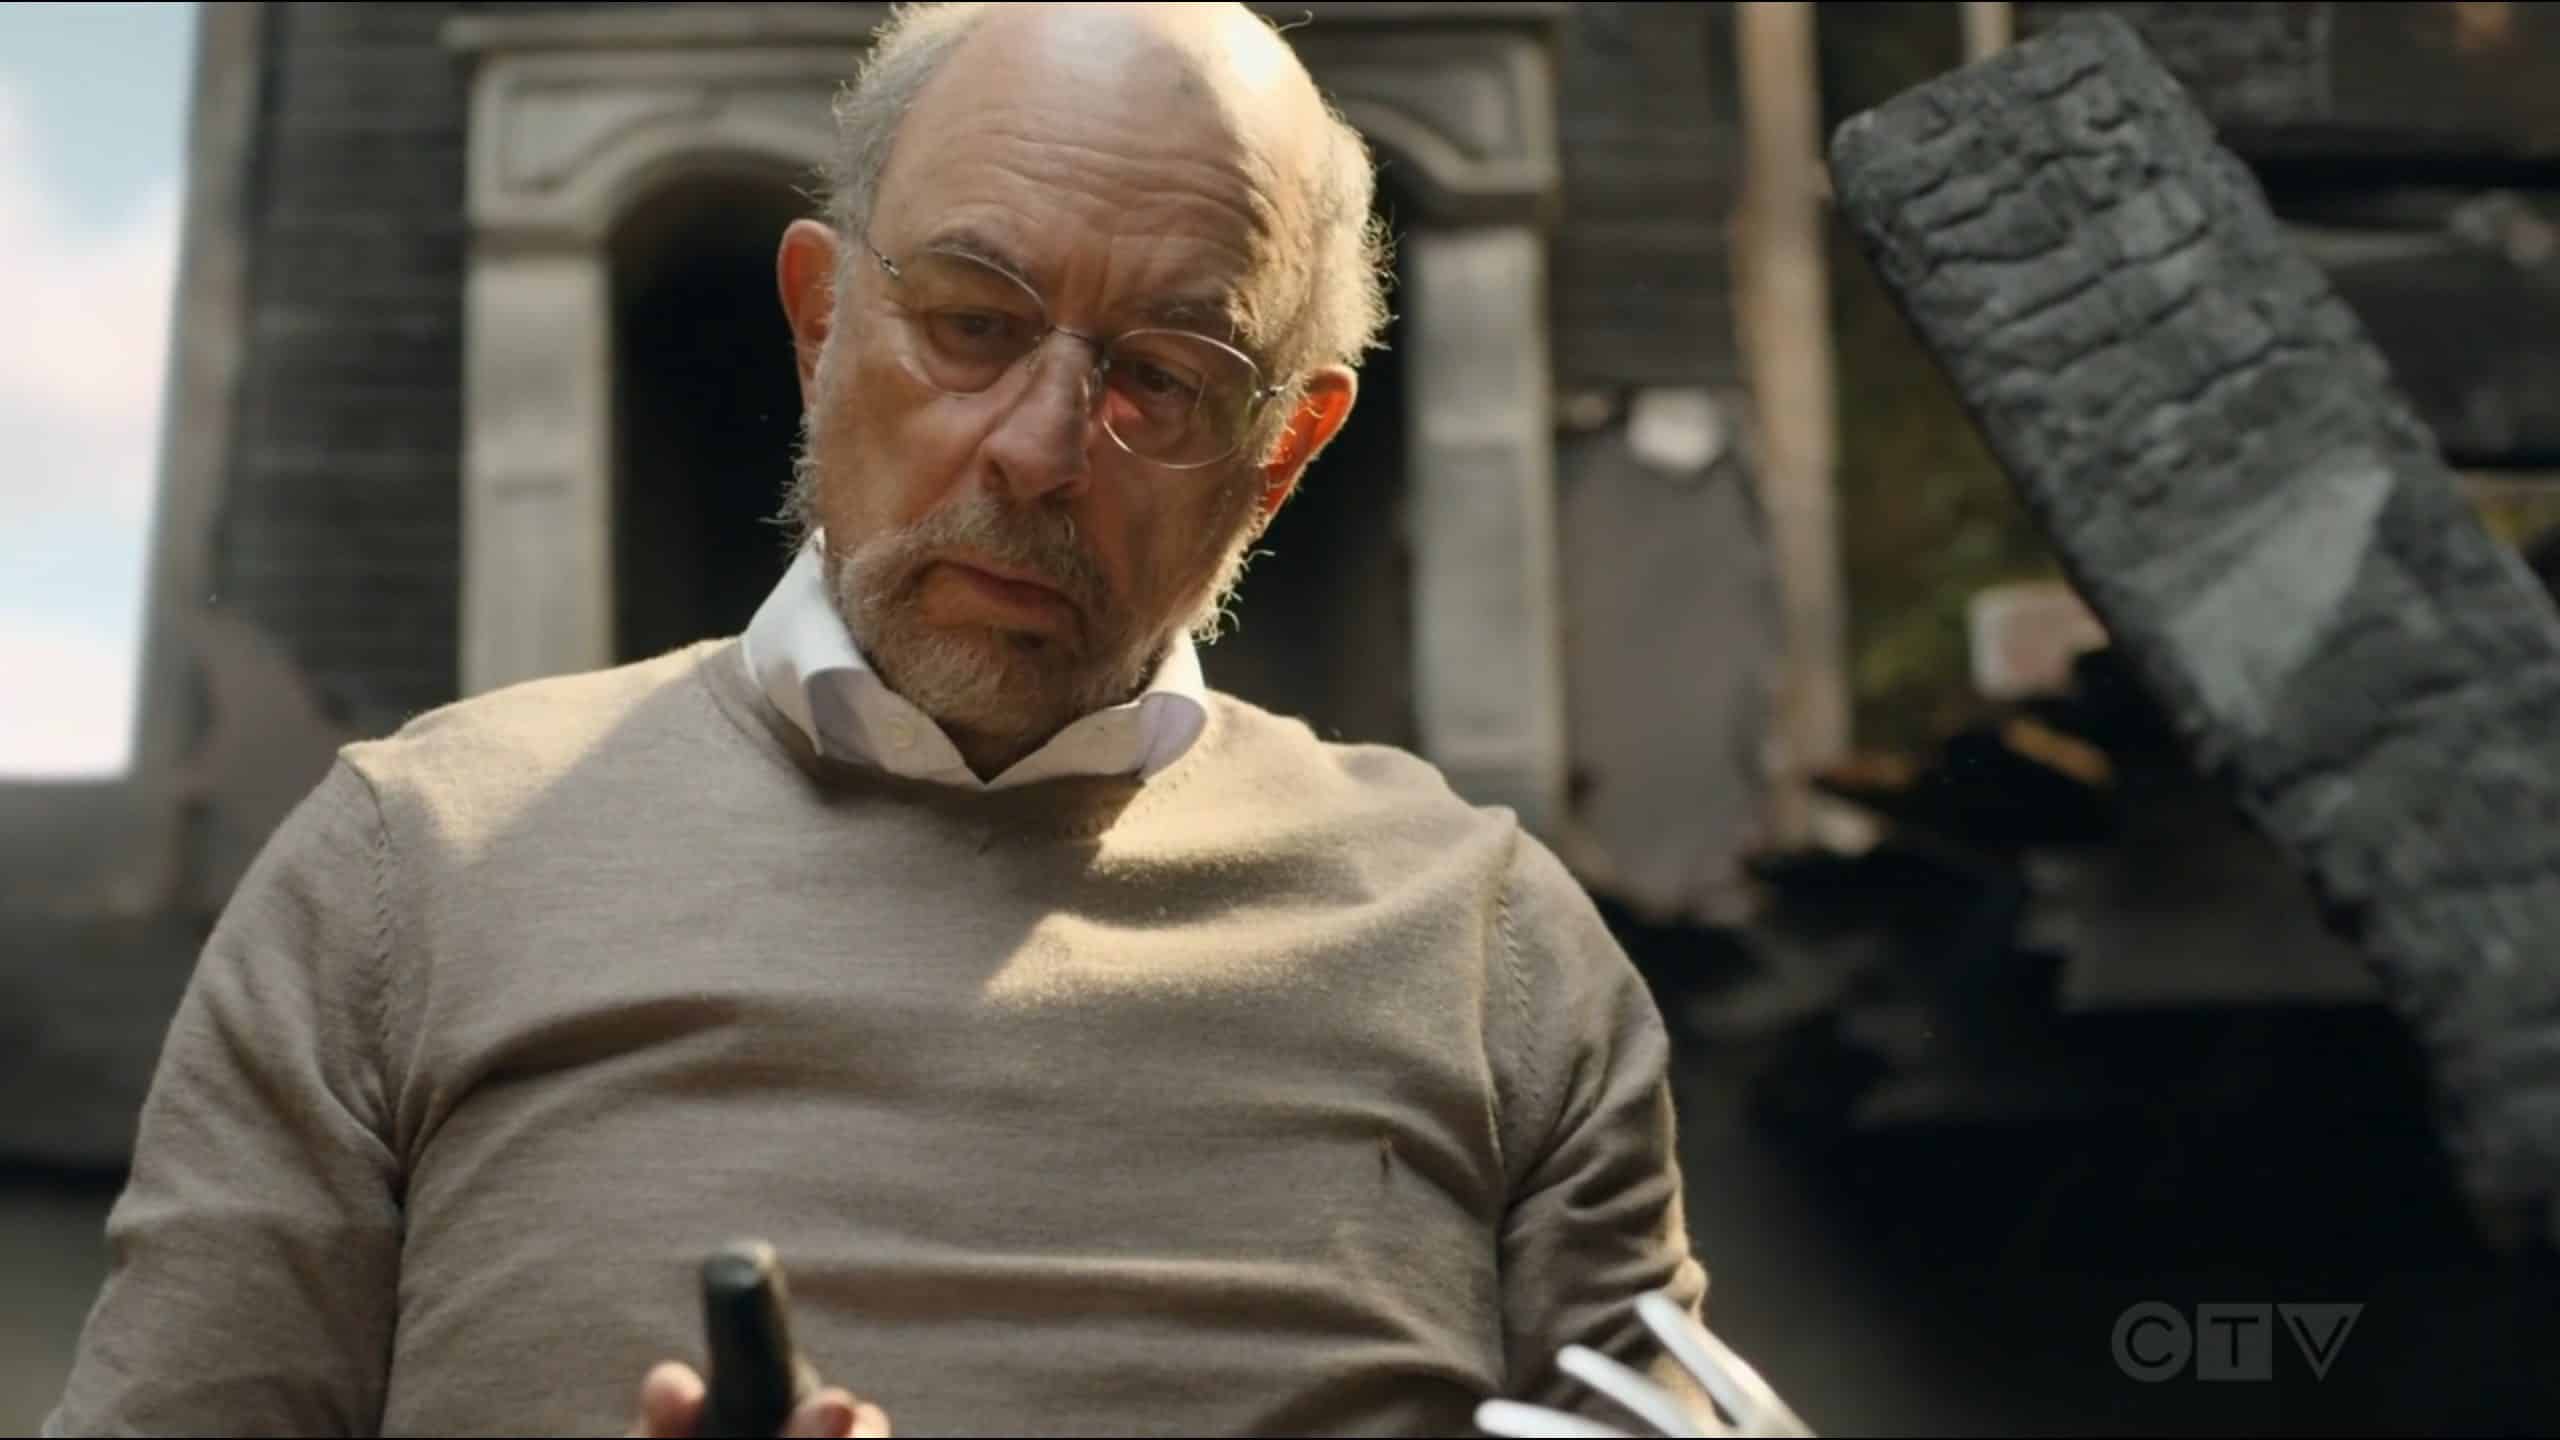 Richard Schiff as Dr. Glassman discovering one of Maddie's nail polish bottles